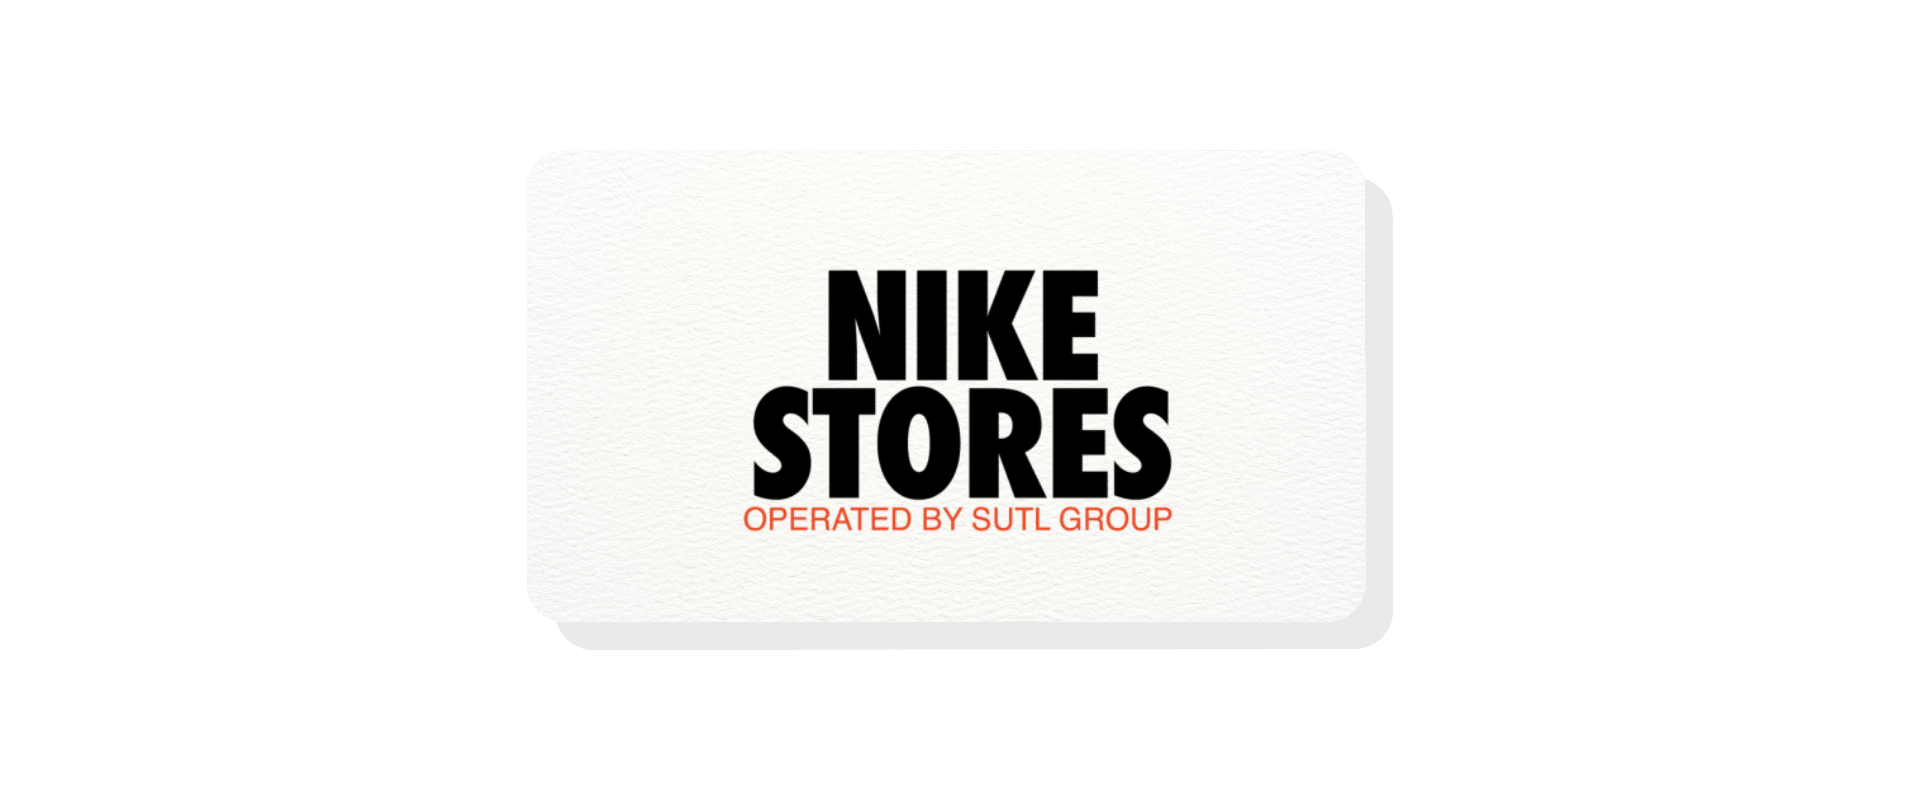 Nike Stores gift card and gift voucher for footwear and more